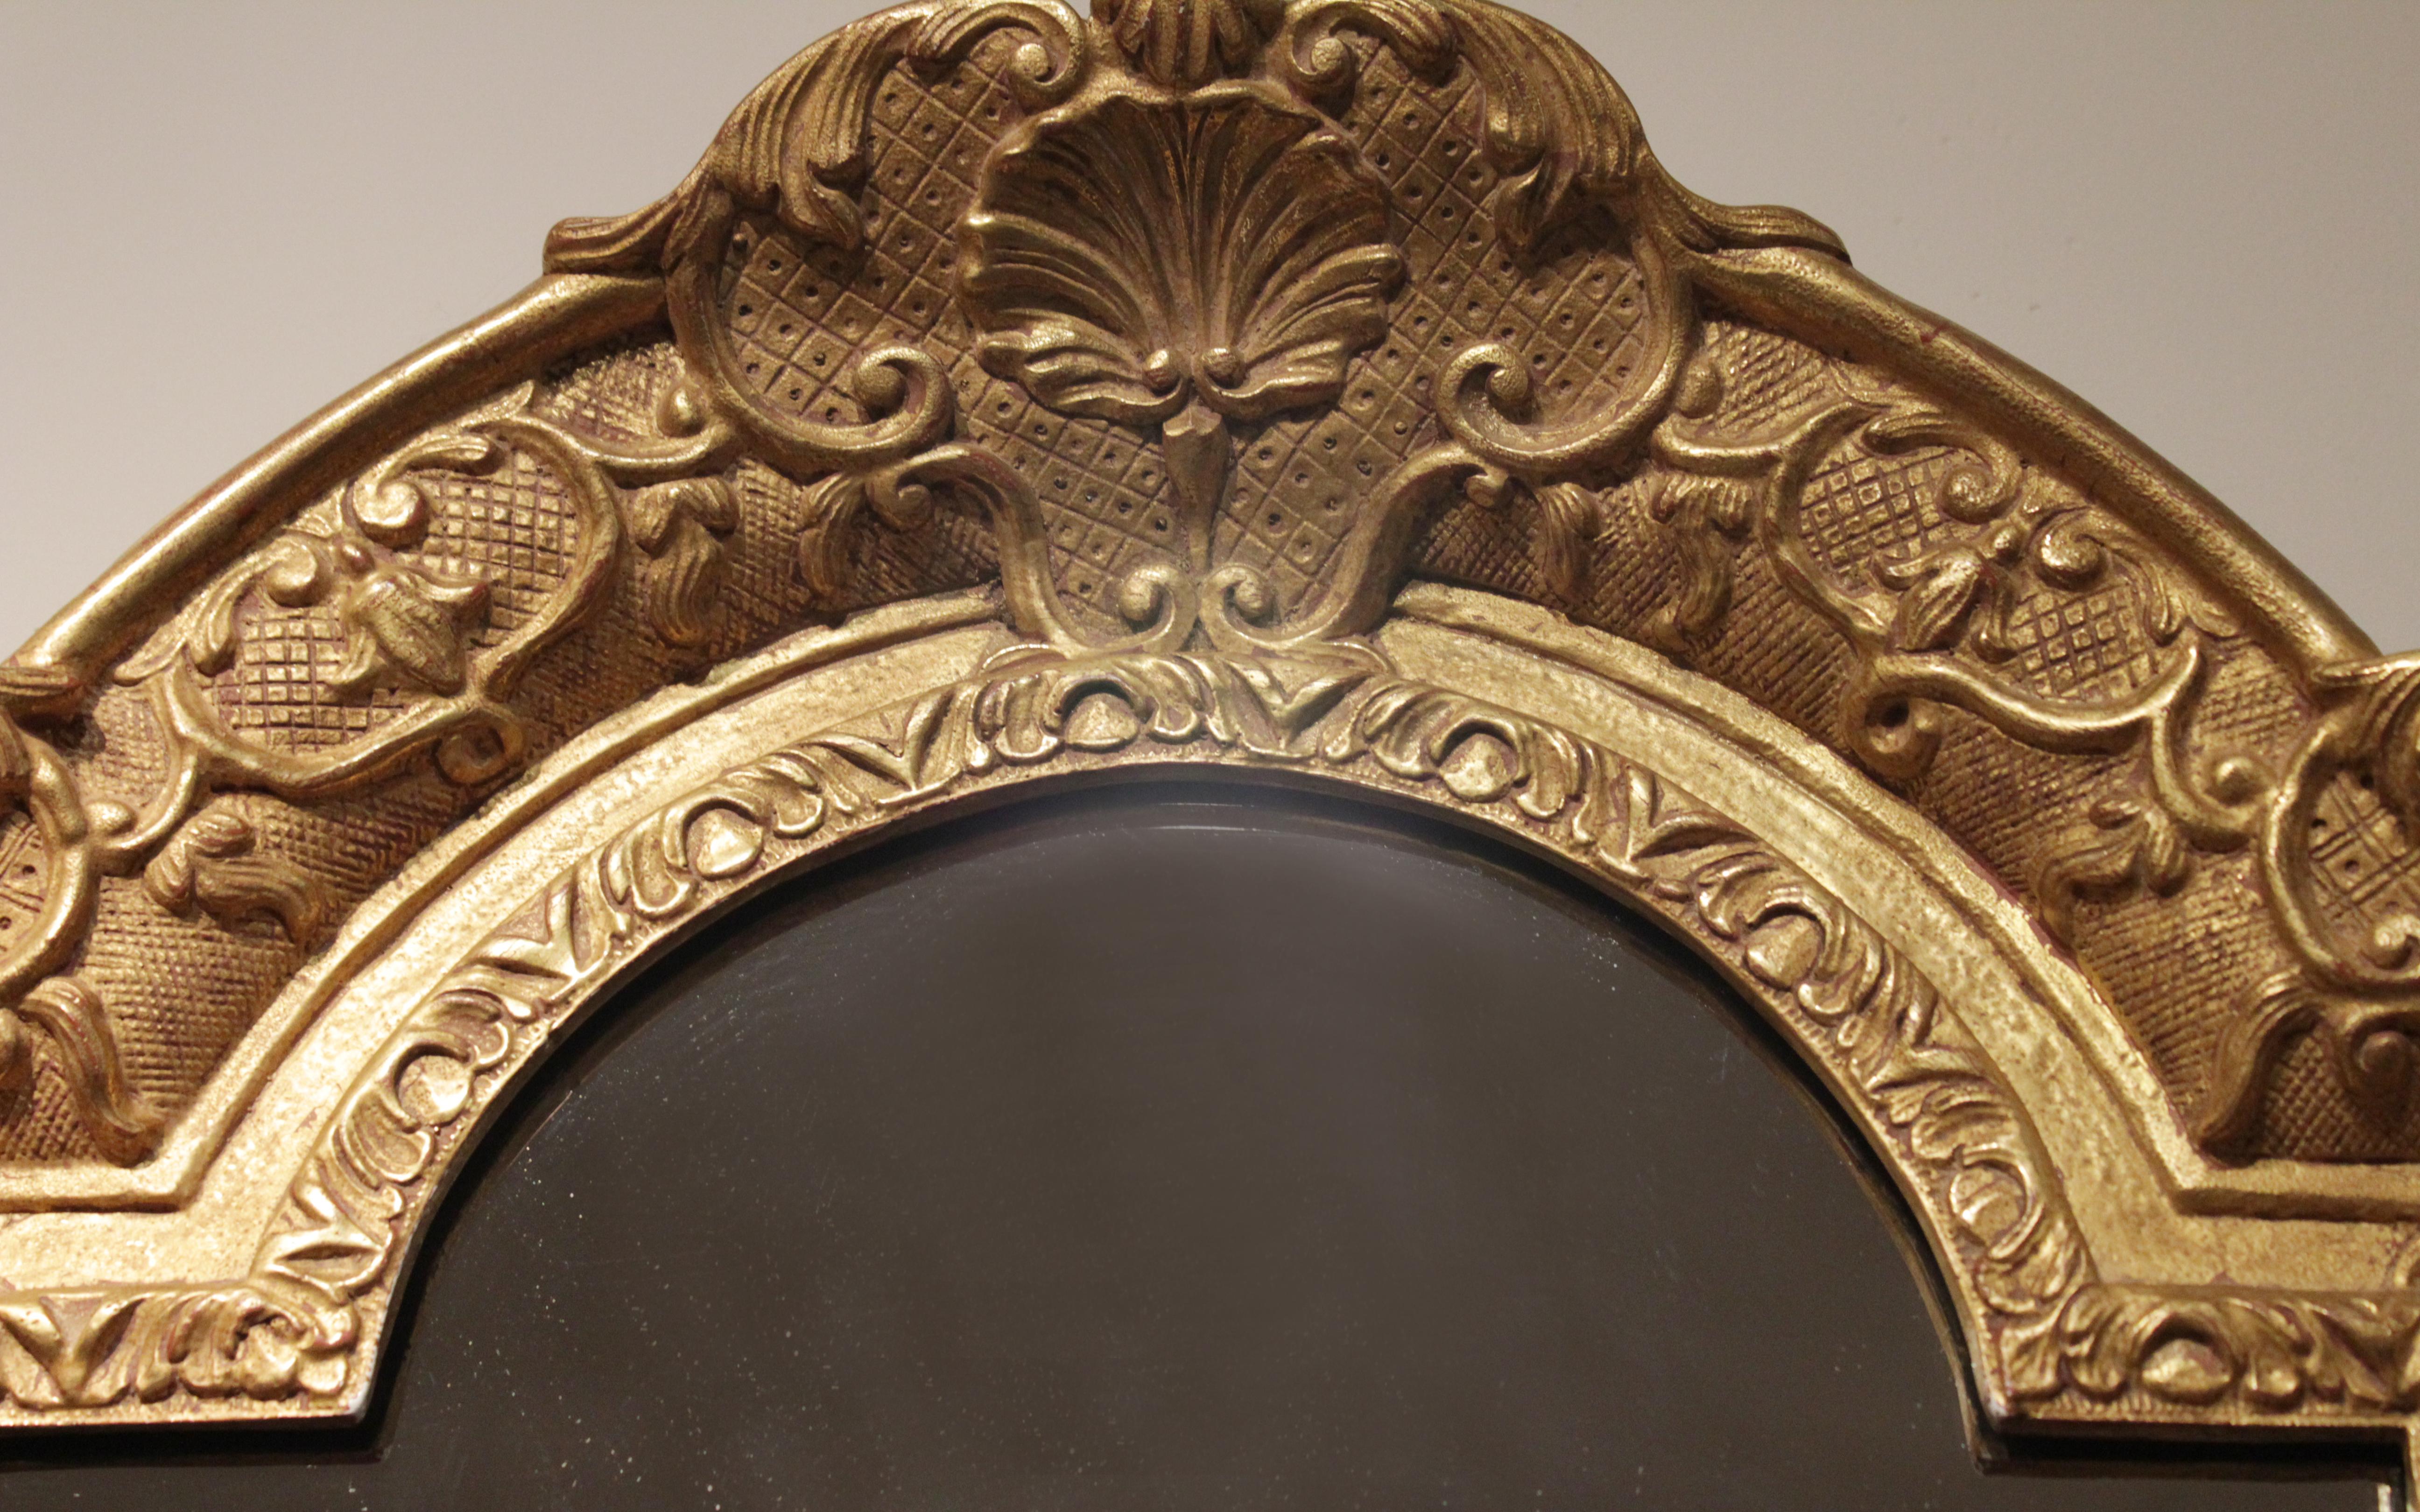 A prime example of APF Munn Frame Makers' excellent antique replica craftsmanship. Goldleaf, Watergilded and handmade.